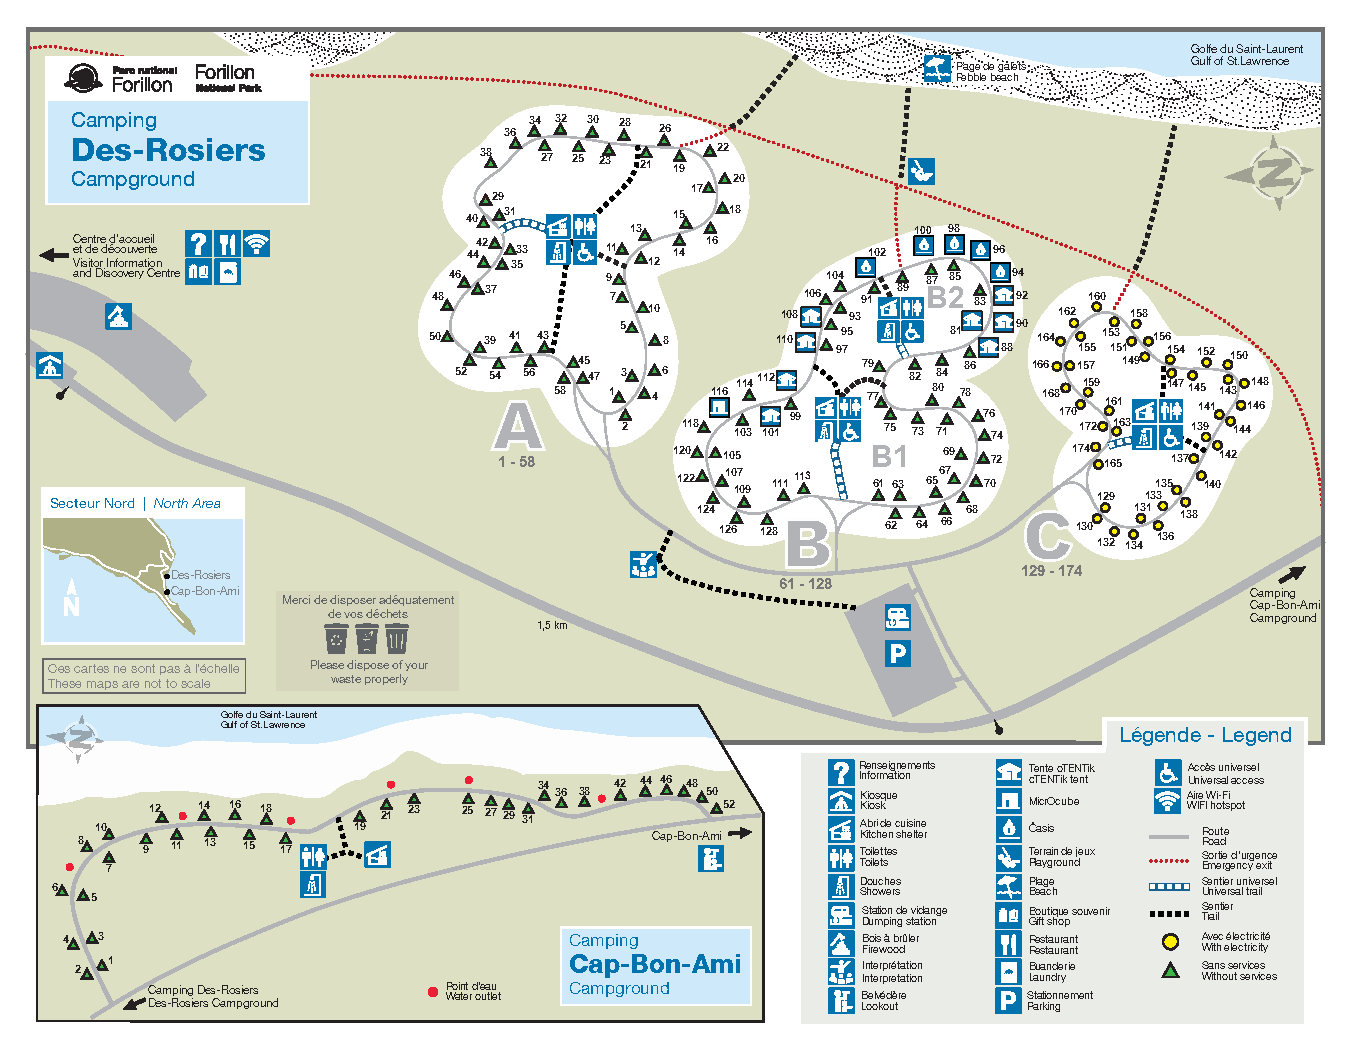 Map of the campgrounds